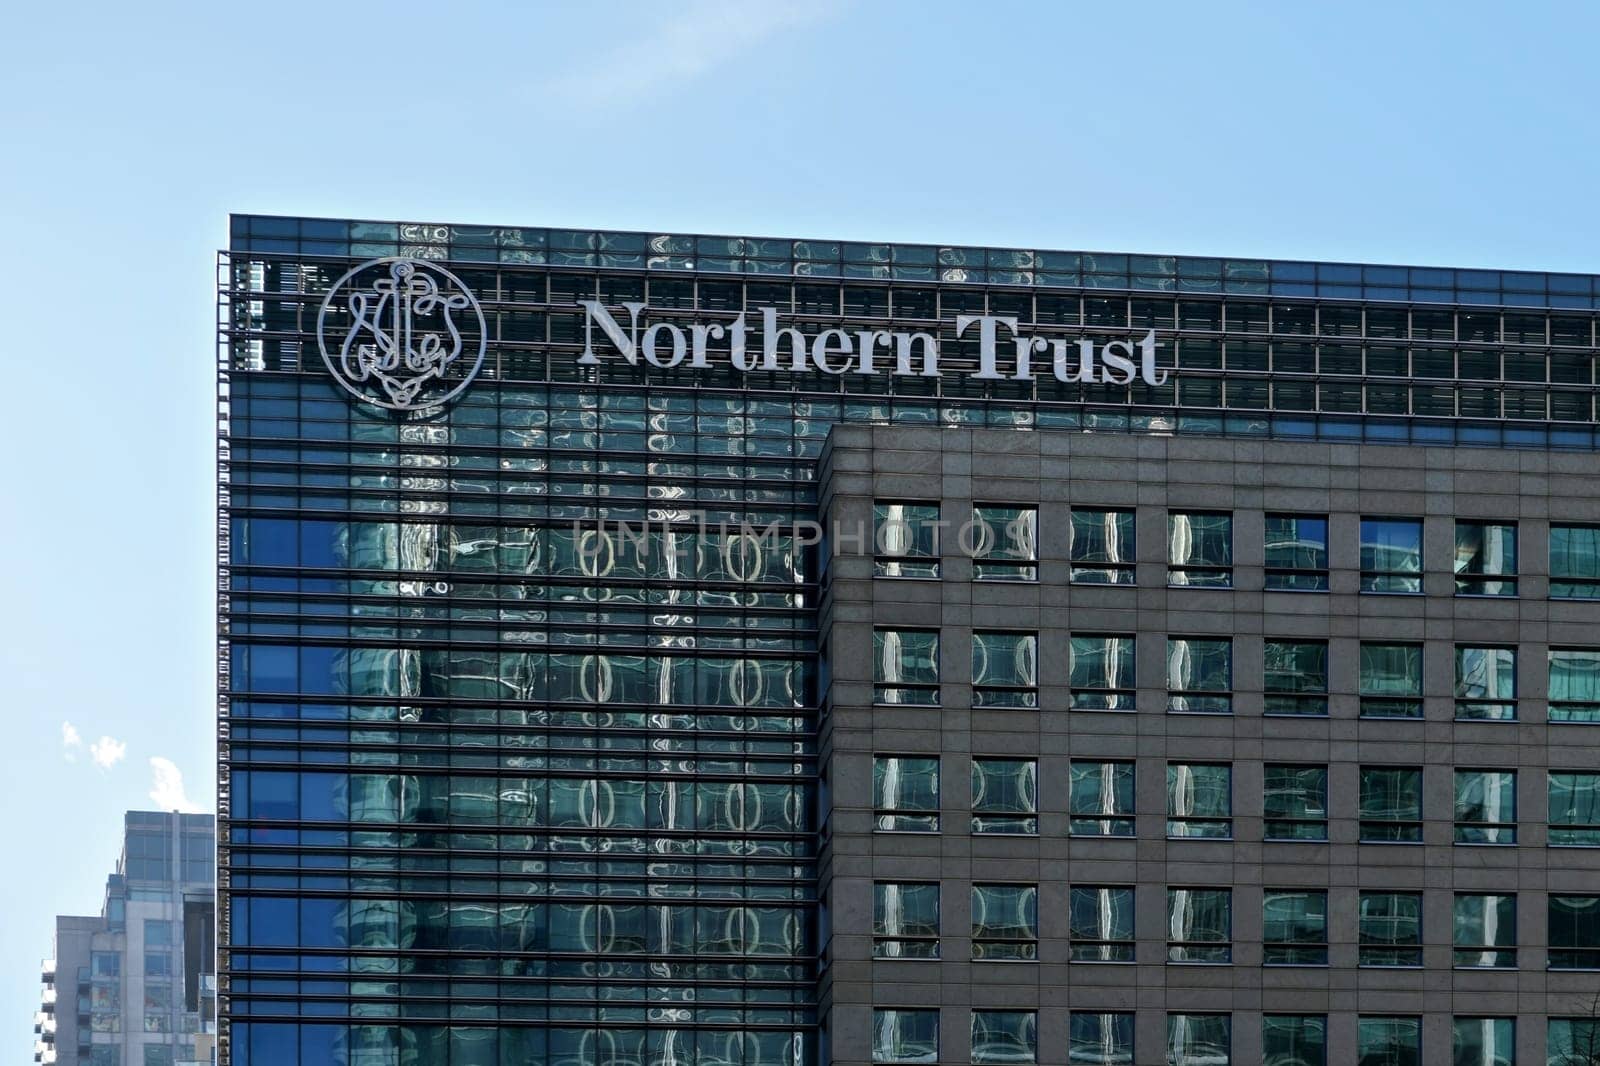 London, United Kingdom - February 03, 2019: Northern Trust UK branch offices at Canary Wharf. NT corporation is financial services company founded in 1889 by Ivanko